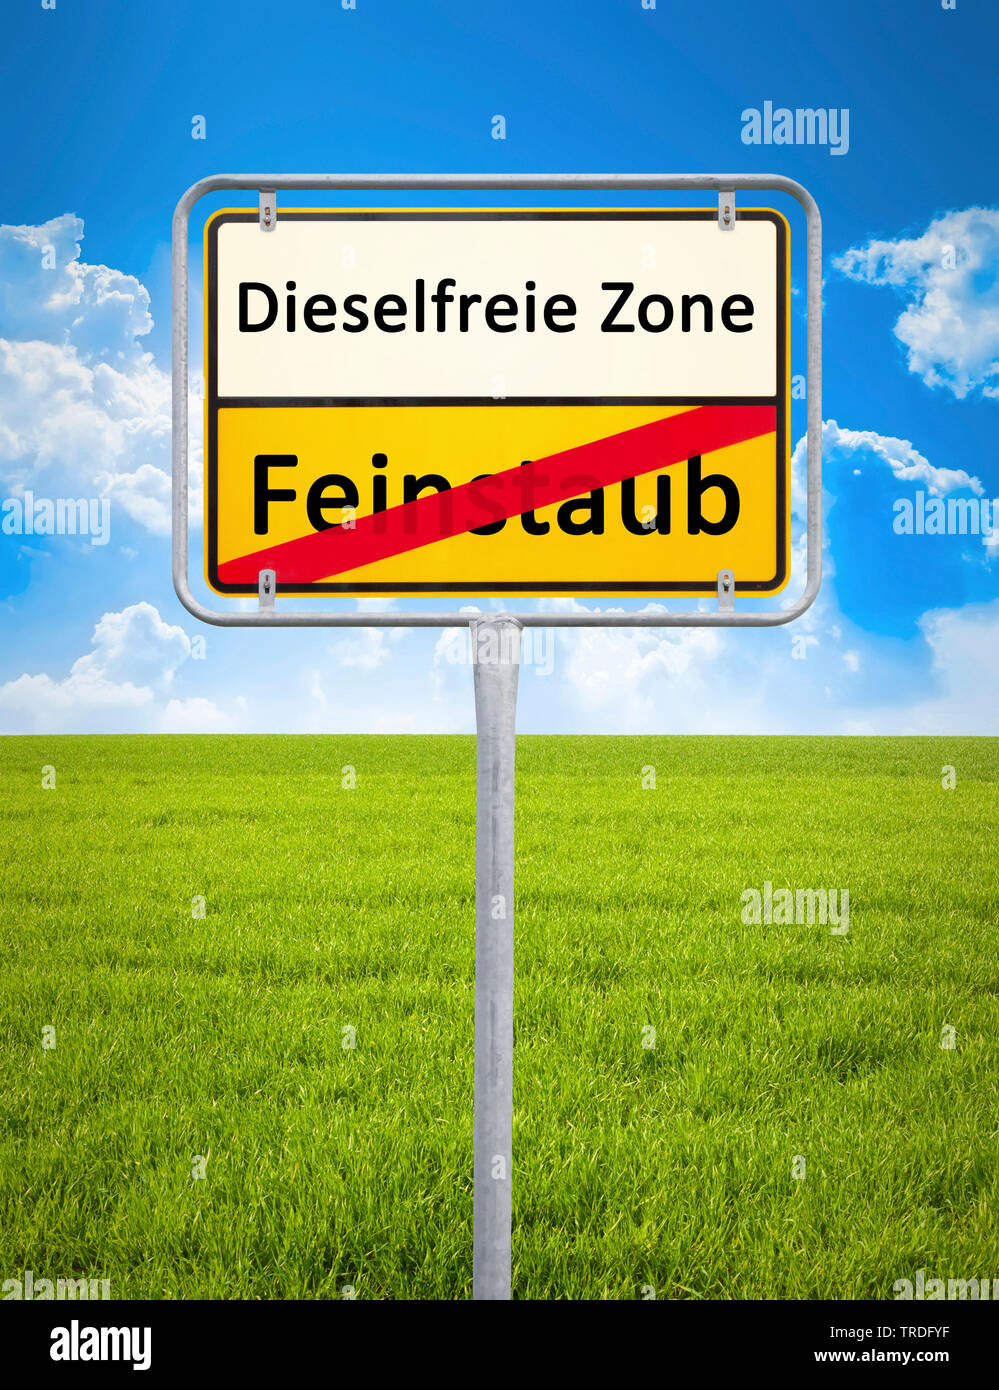 3D computer graphic, city limits sign lettering FEINSTAUB / DIESELFREIE ZONE (fine dust / diesel not permitted) Stock Photo